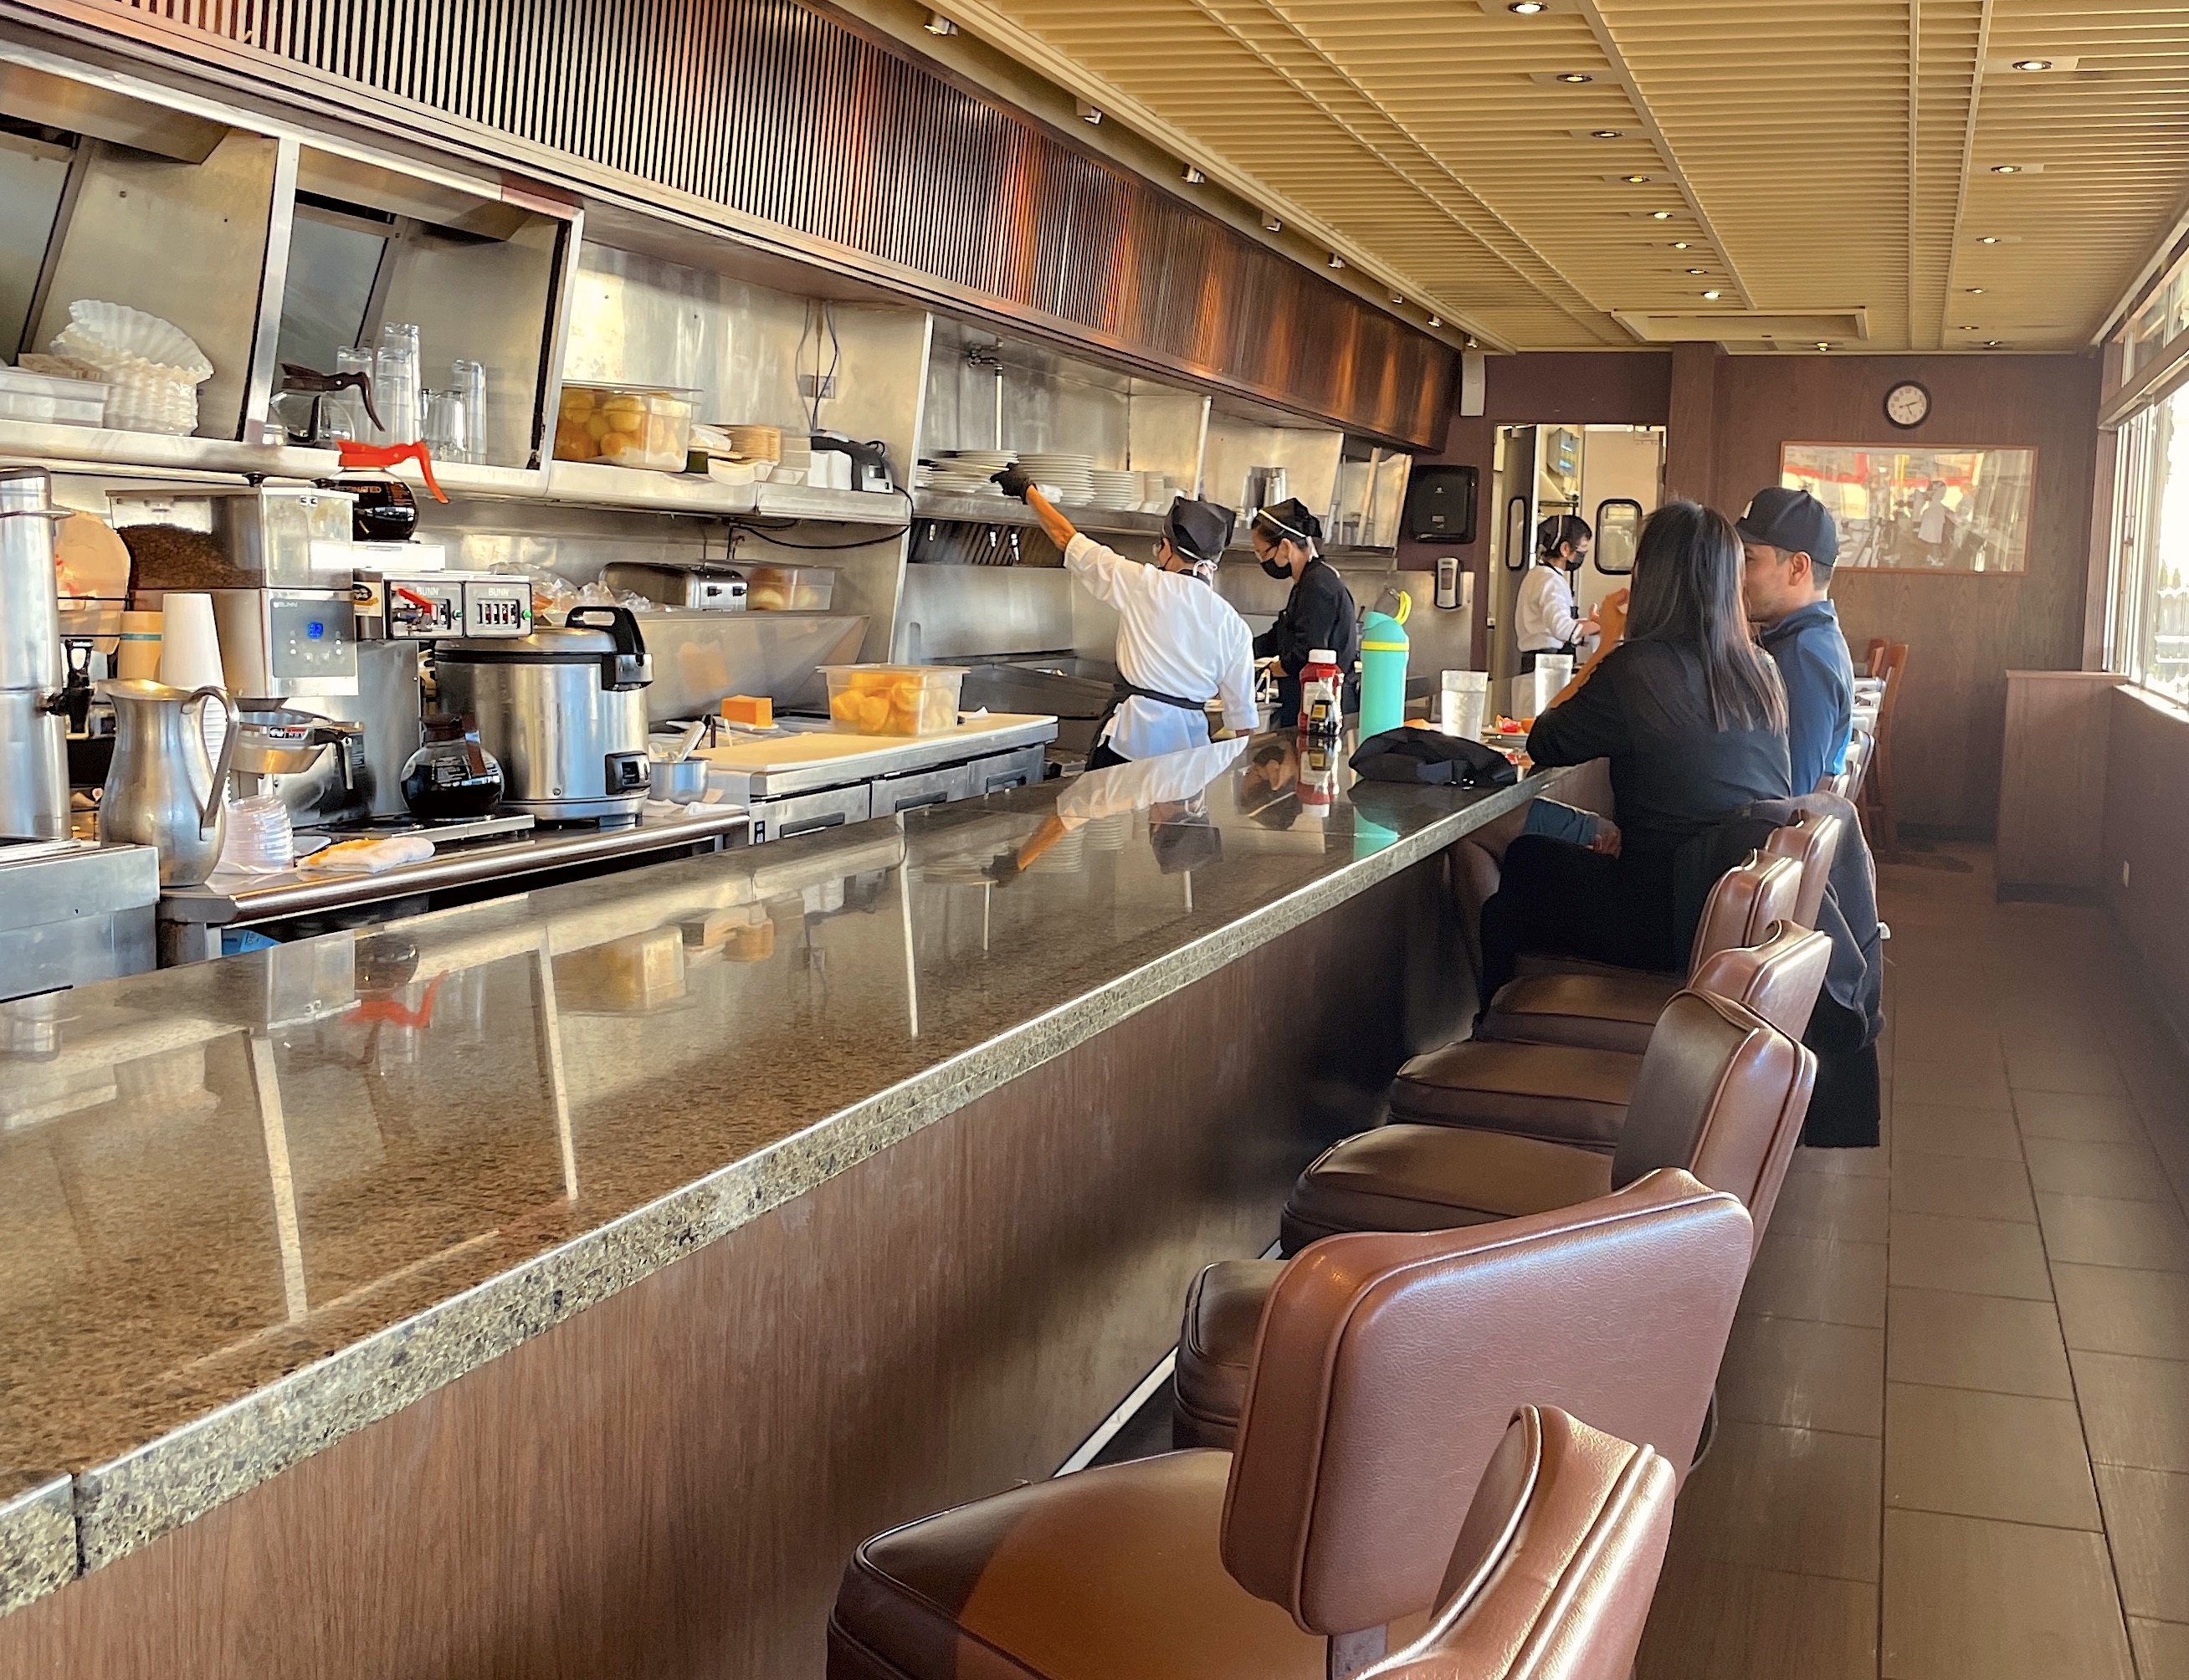 Customers sit on stools at a thin counter inside a diner.